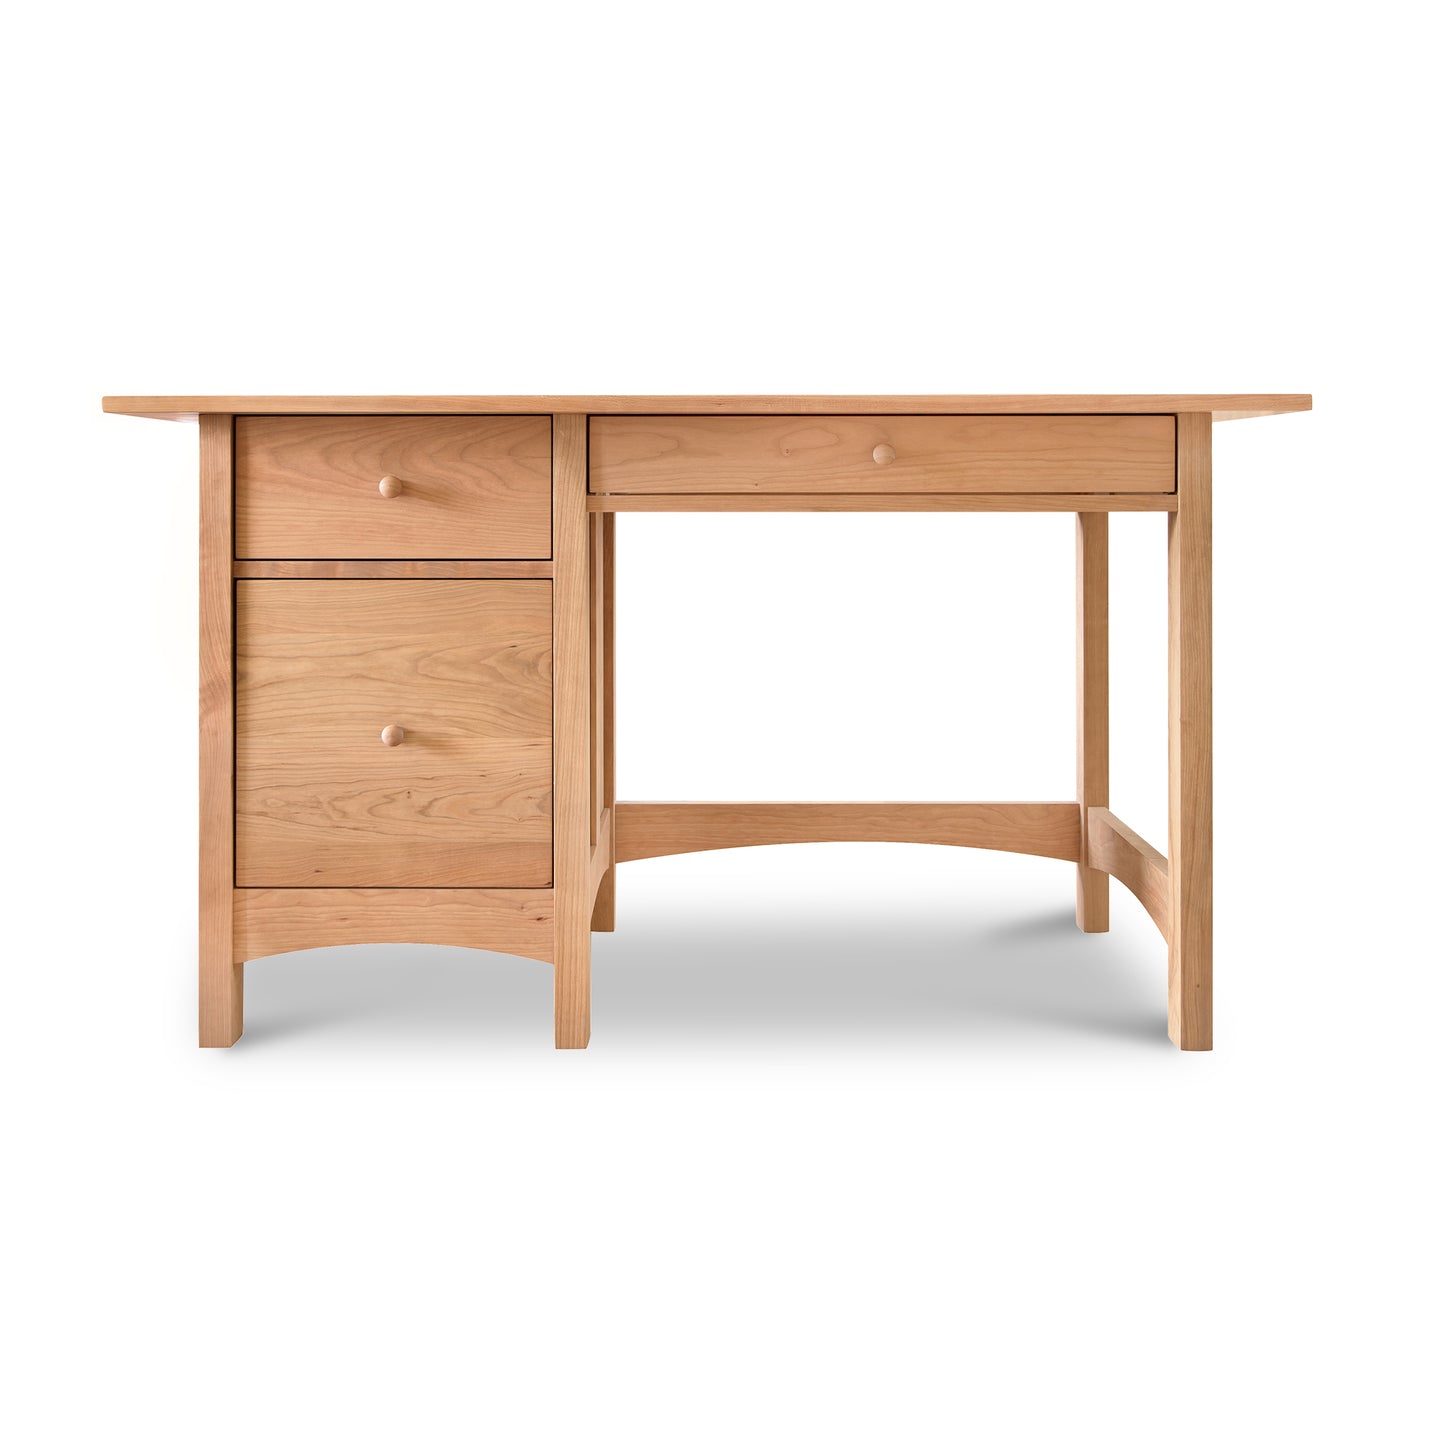 A Vermont Furniture Designs Burlington Shaker Study Desk with two drawers on one side, isolated on a white background.